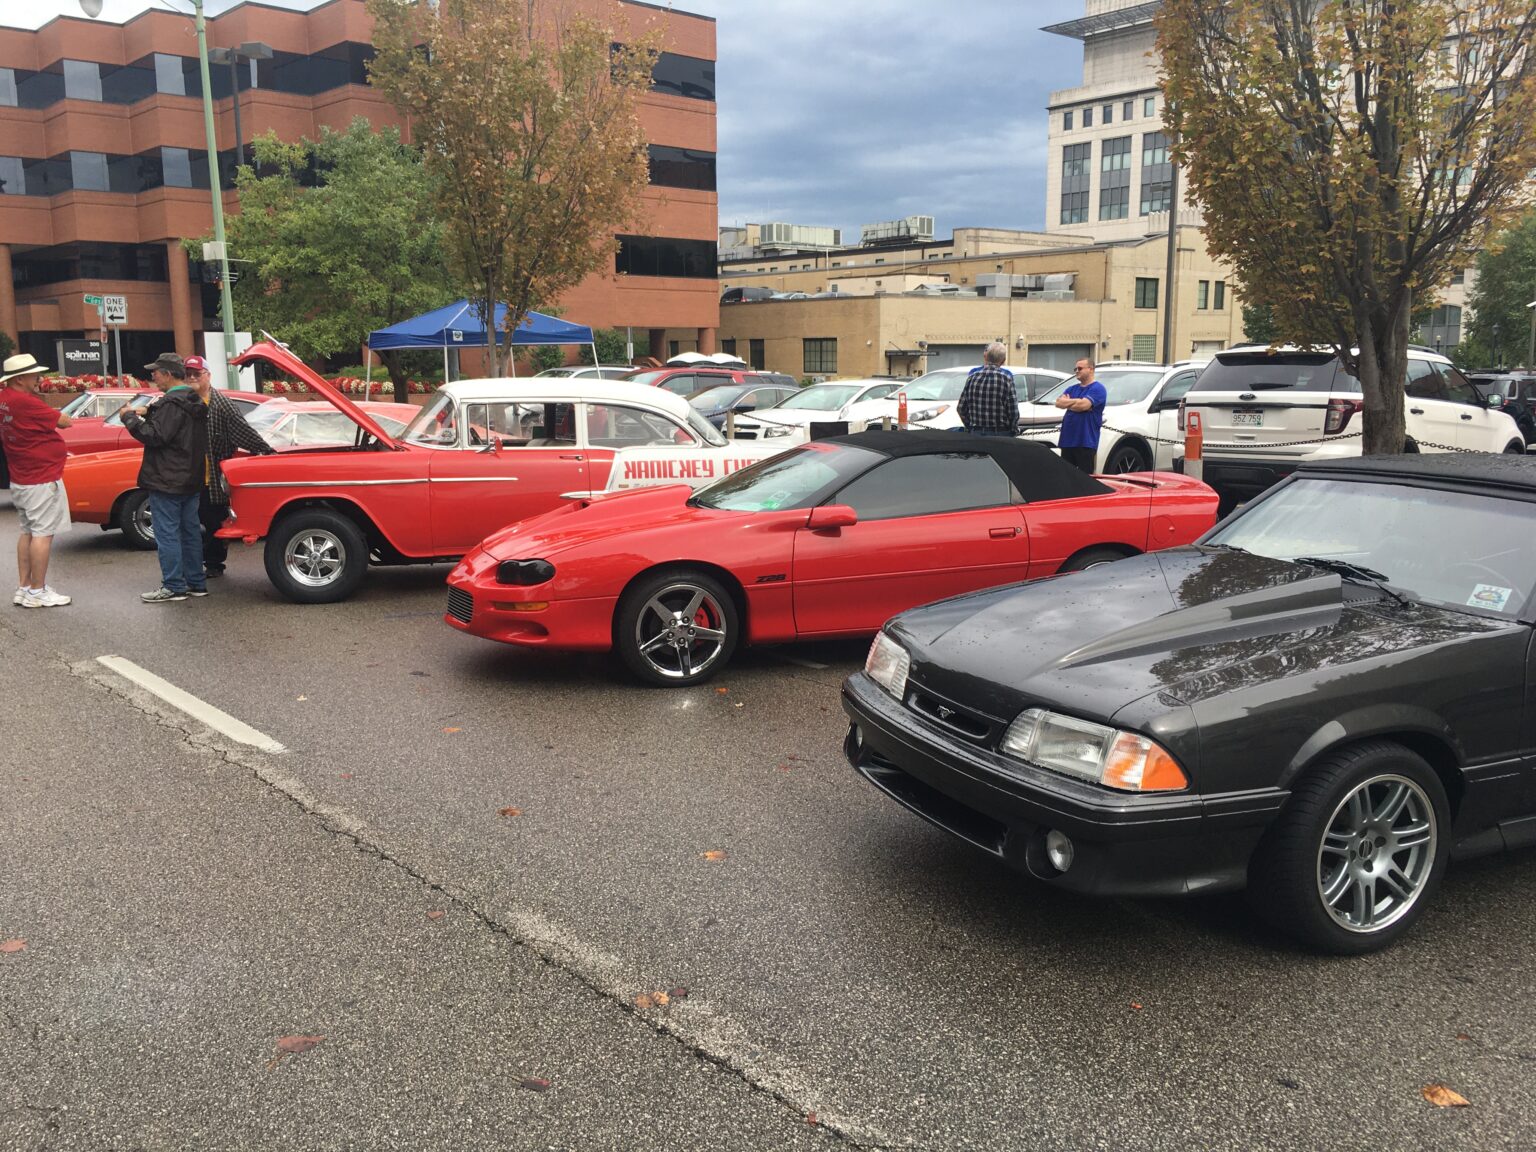 Charleston's classic car show opens for 2021 WV MetroNews